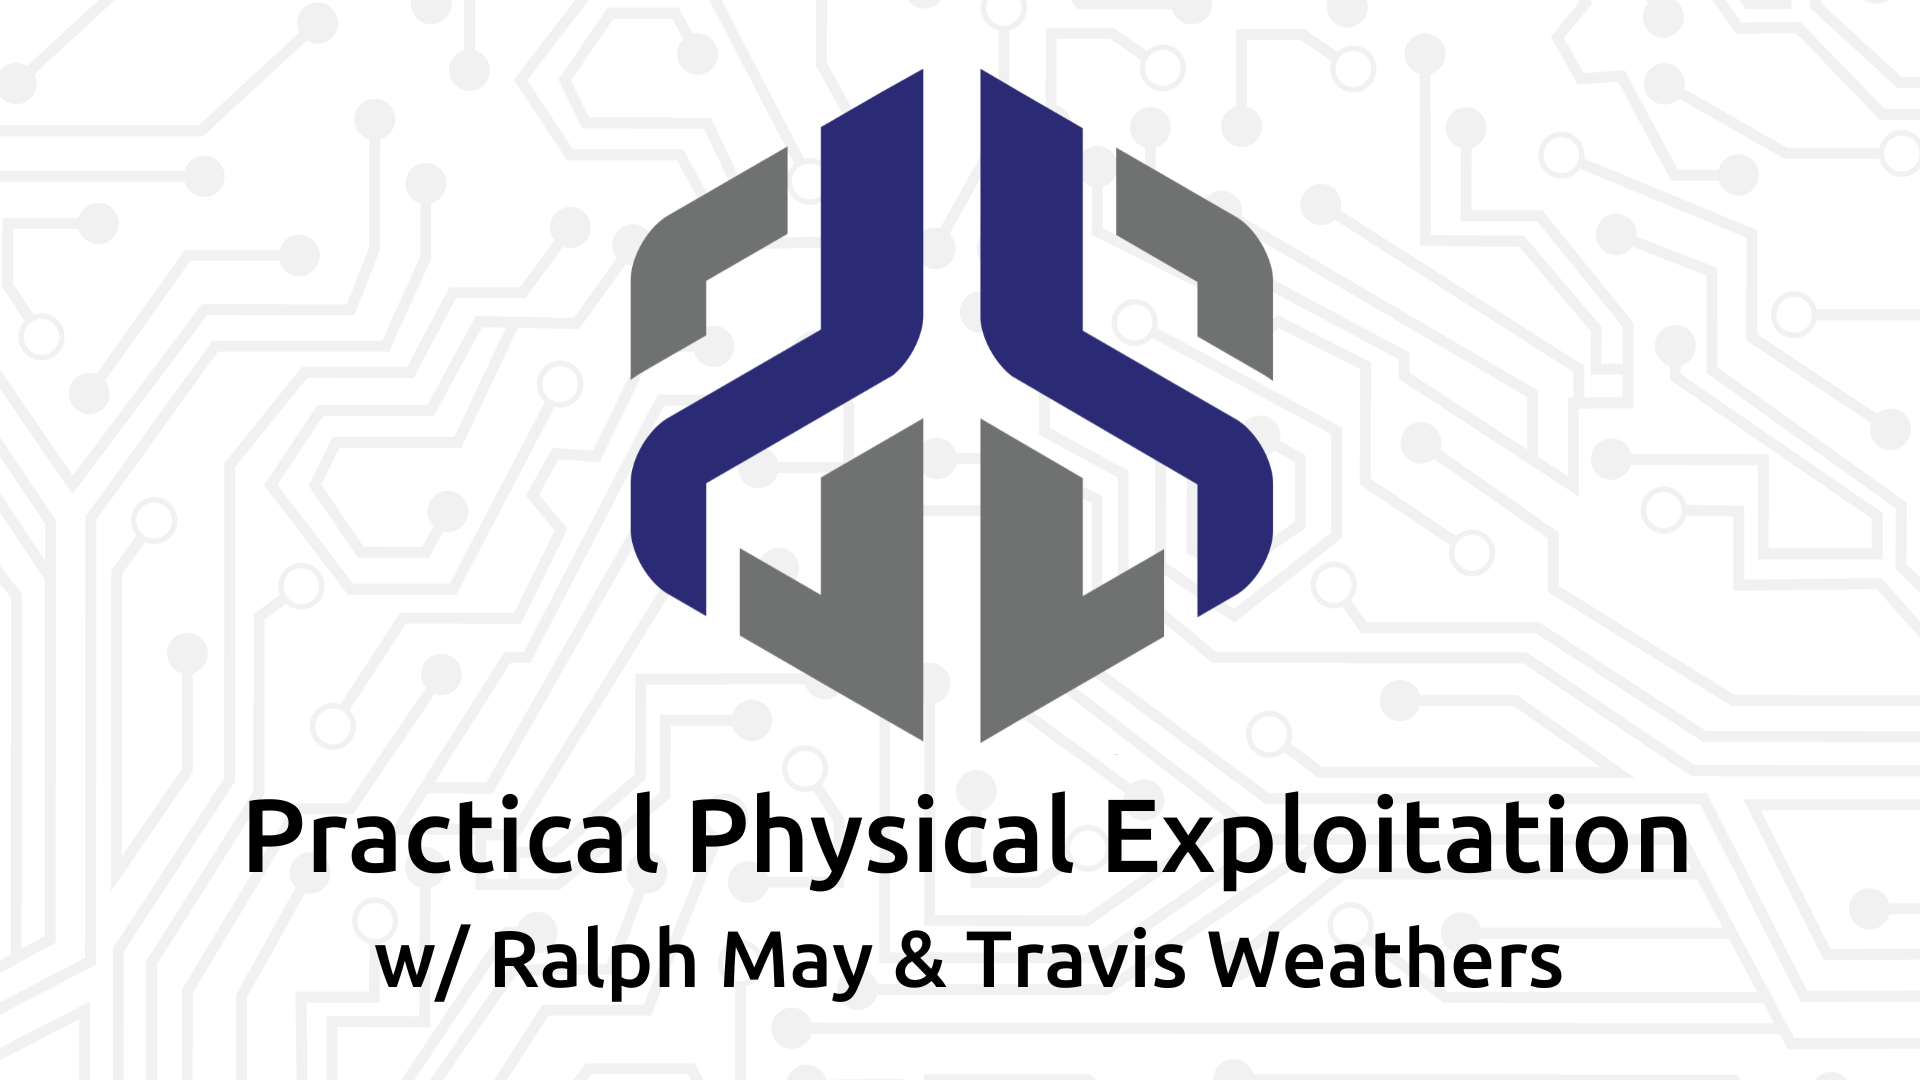 Practical Physical Exploitation | Ralph May & Travis Weathers